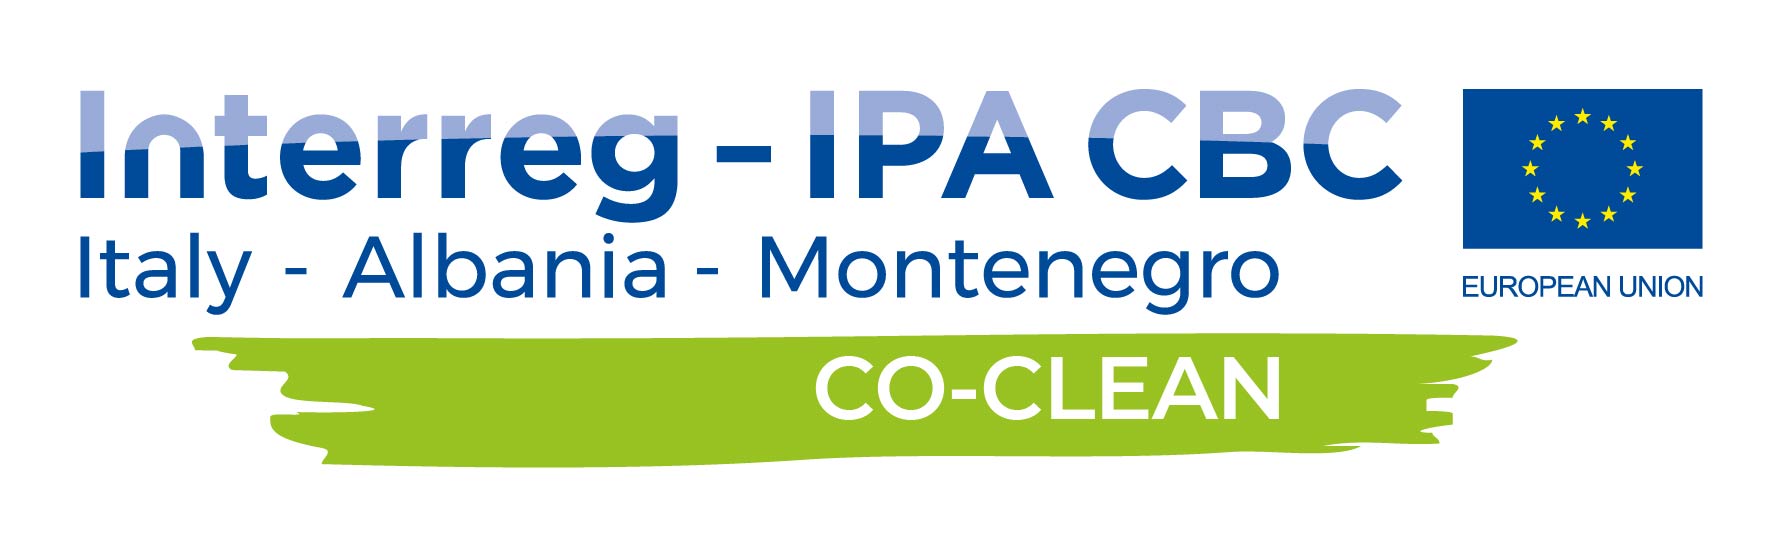 CO-CLEAN project logo